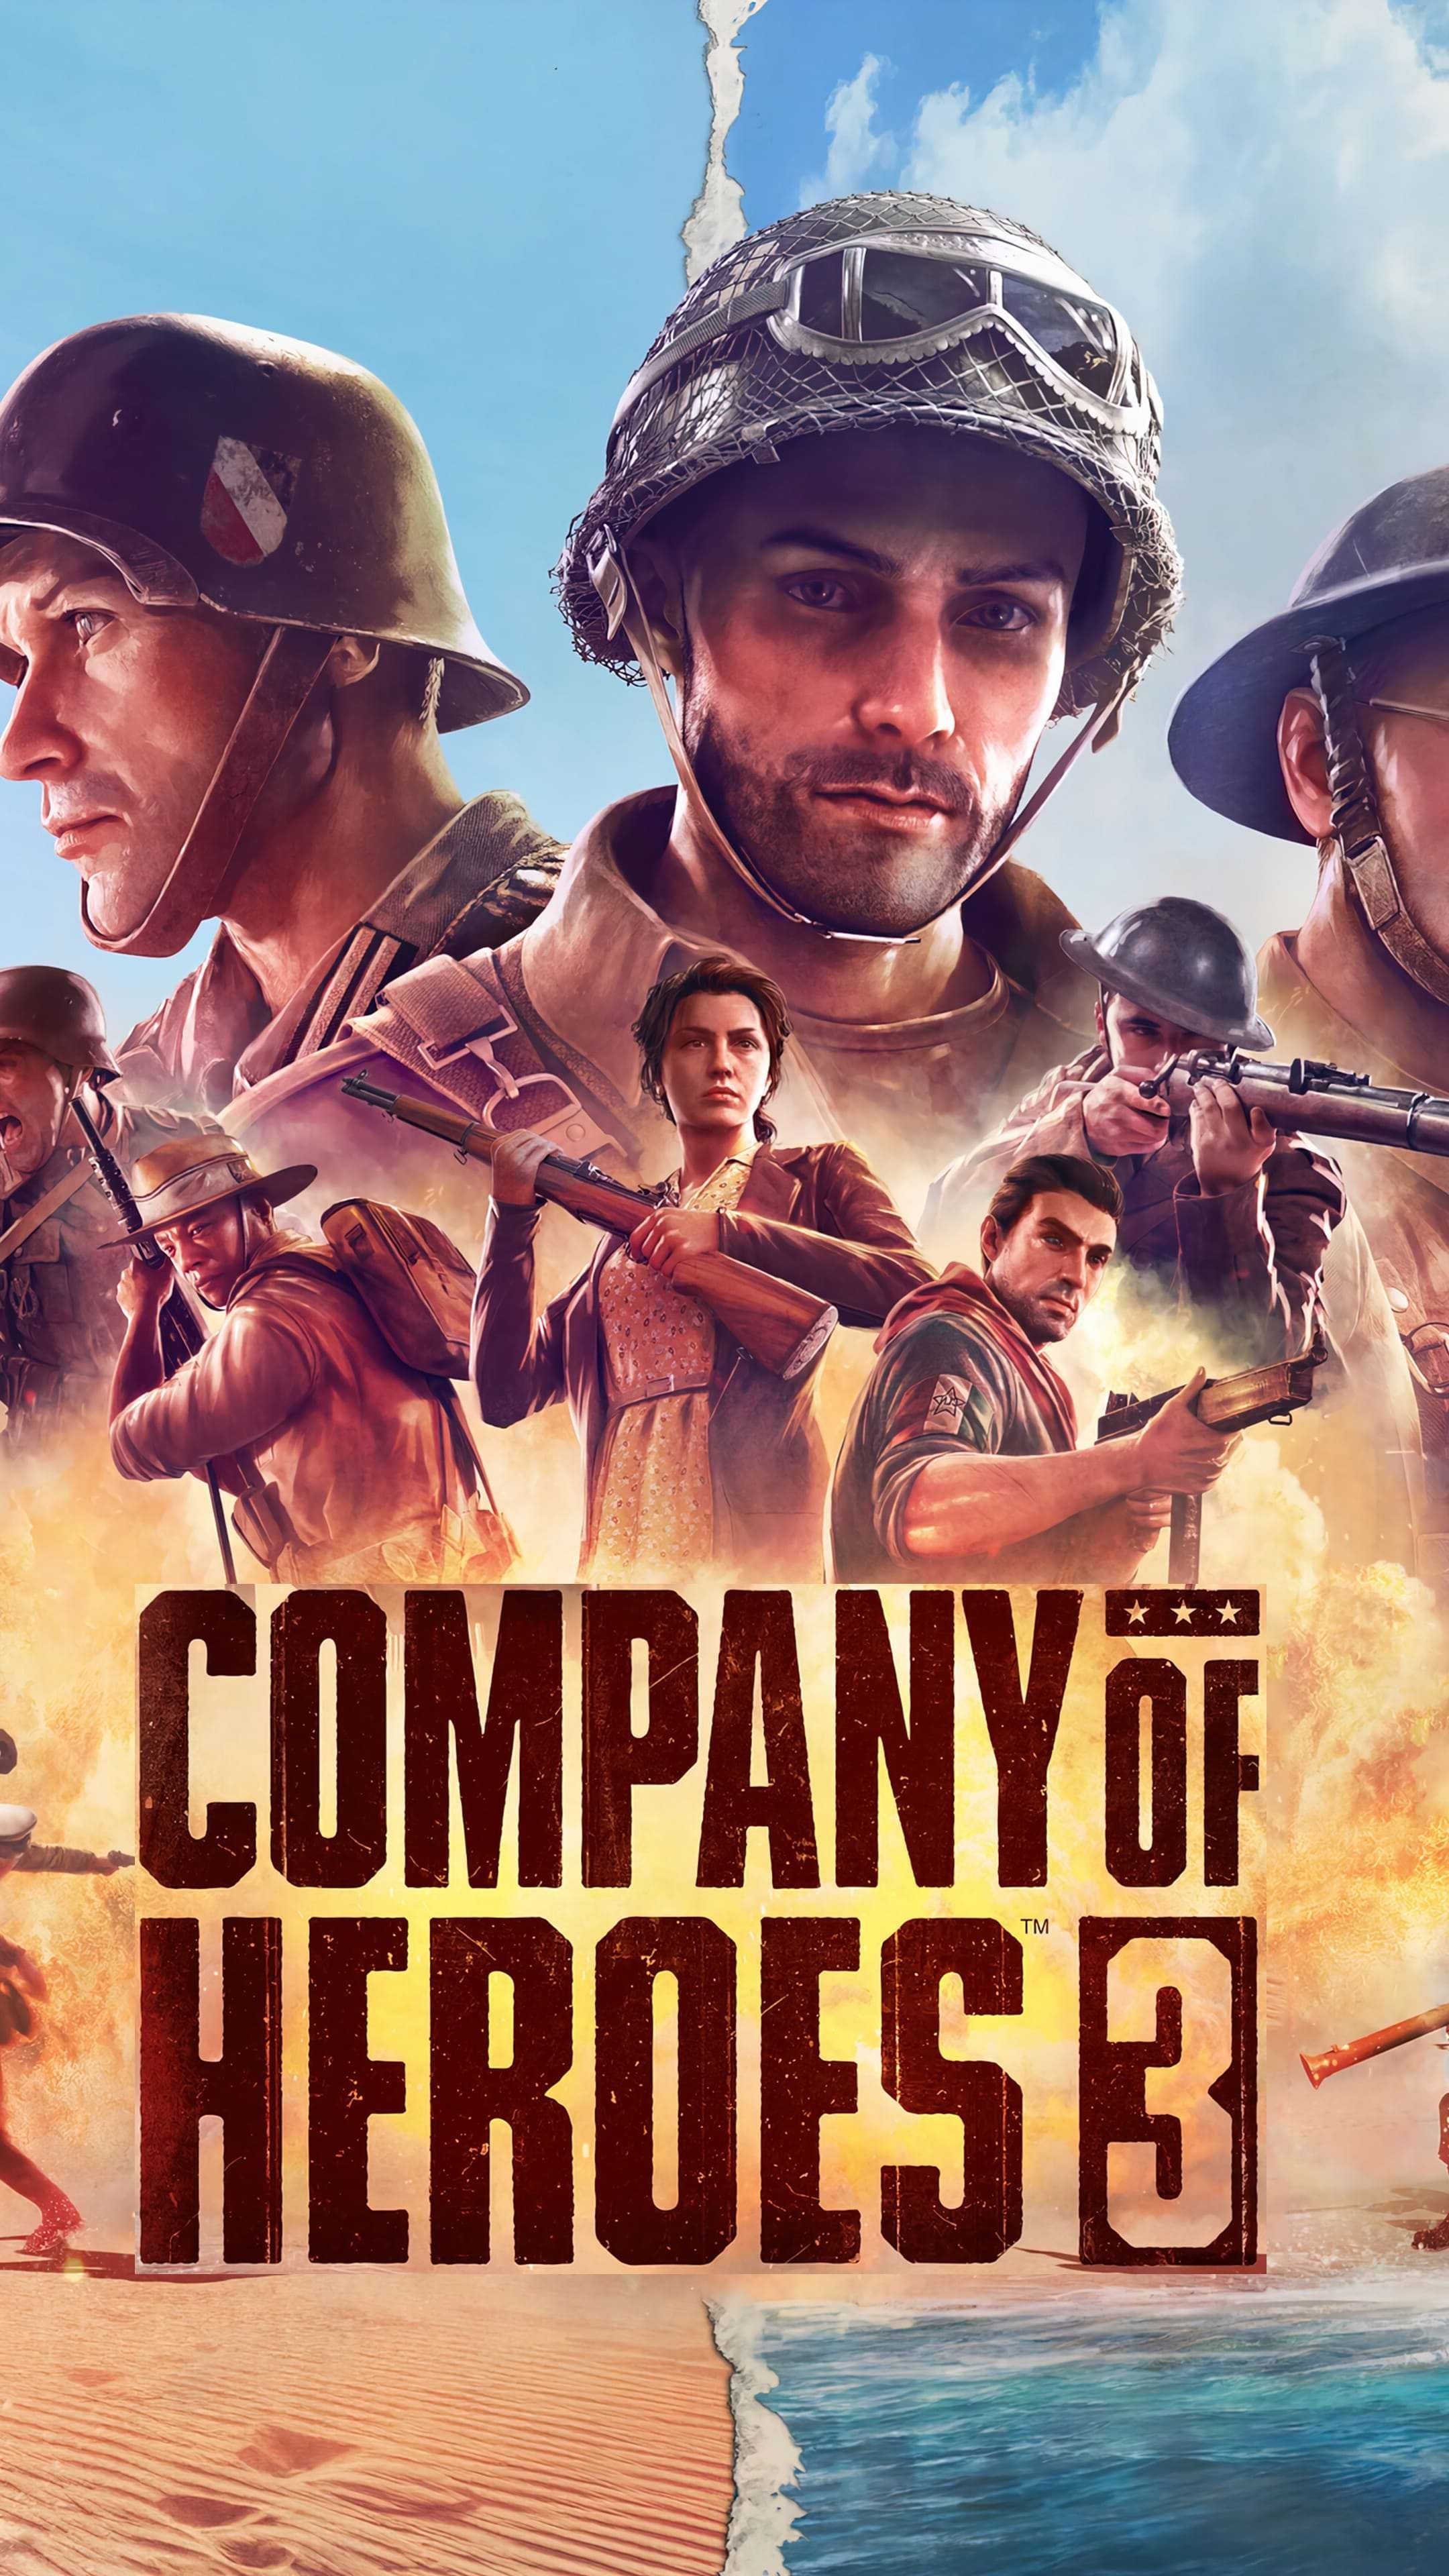 Company of Heroes 3: A real-time strategy game developed by Relic Entertainment. 2160x3840 4K Background.